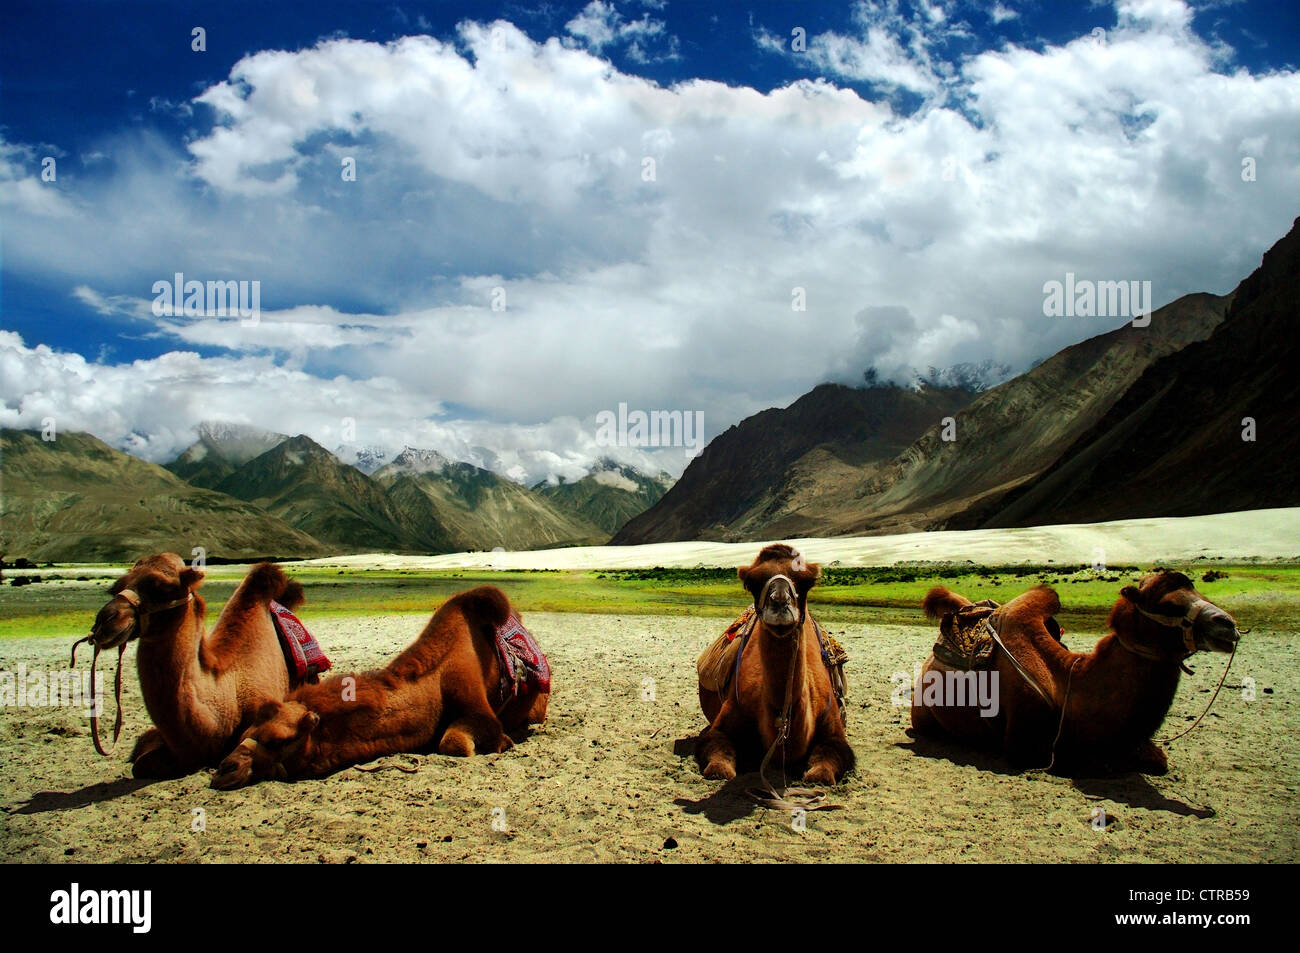 a group of Camel is resting in the desert of the Nubra valley, Ladakh, India Stock Photo